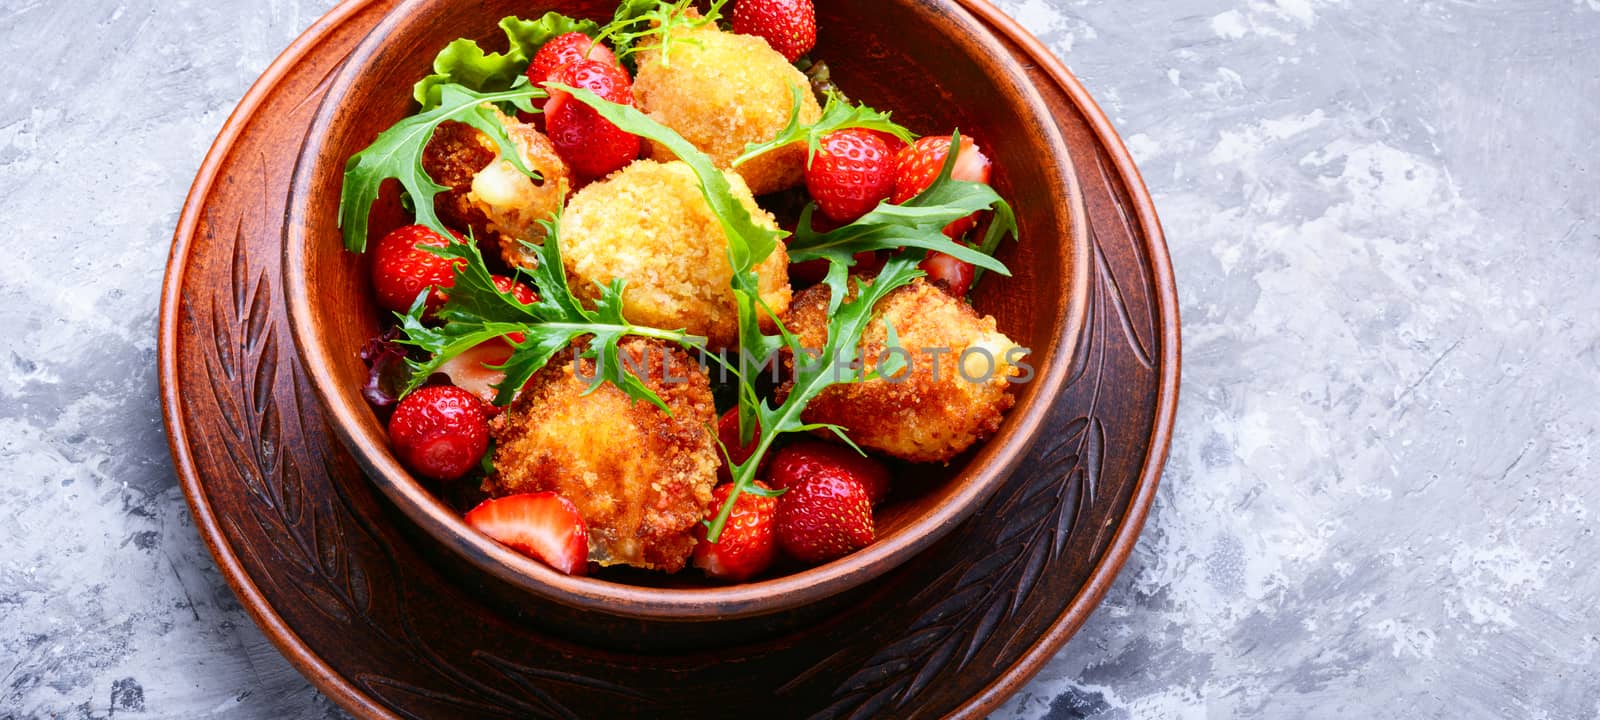 Salad with strawberry and fried cheese by LMykola